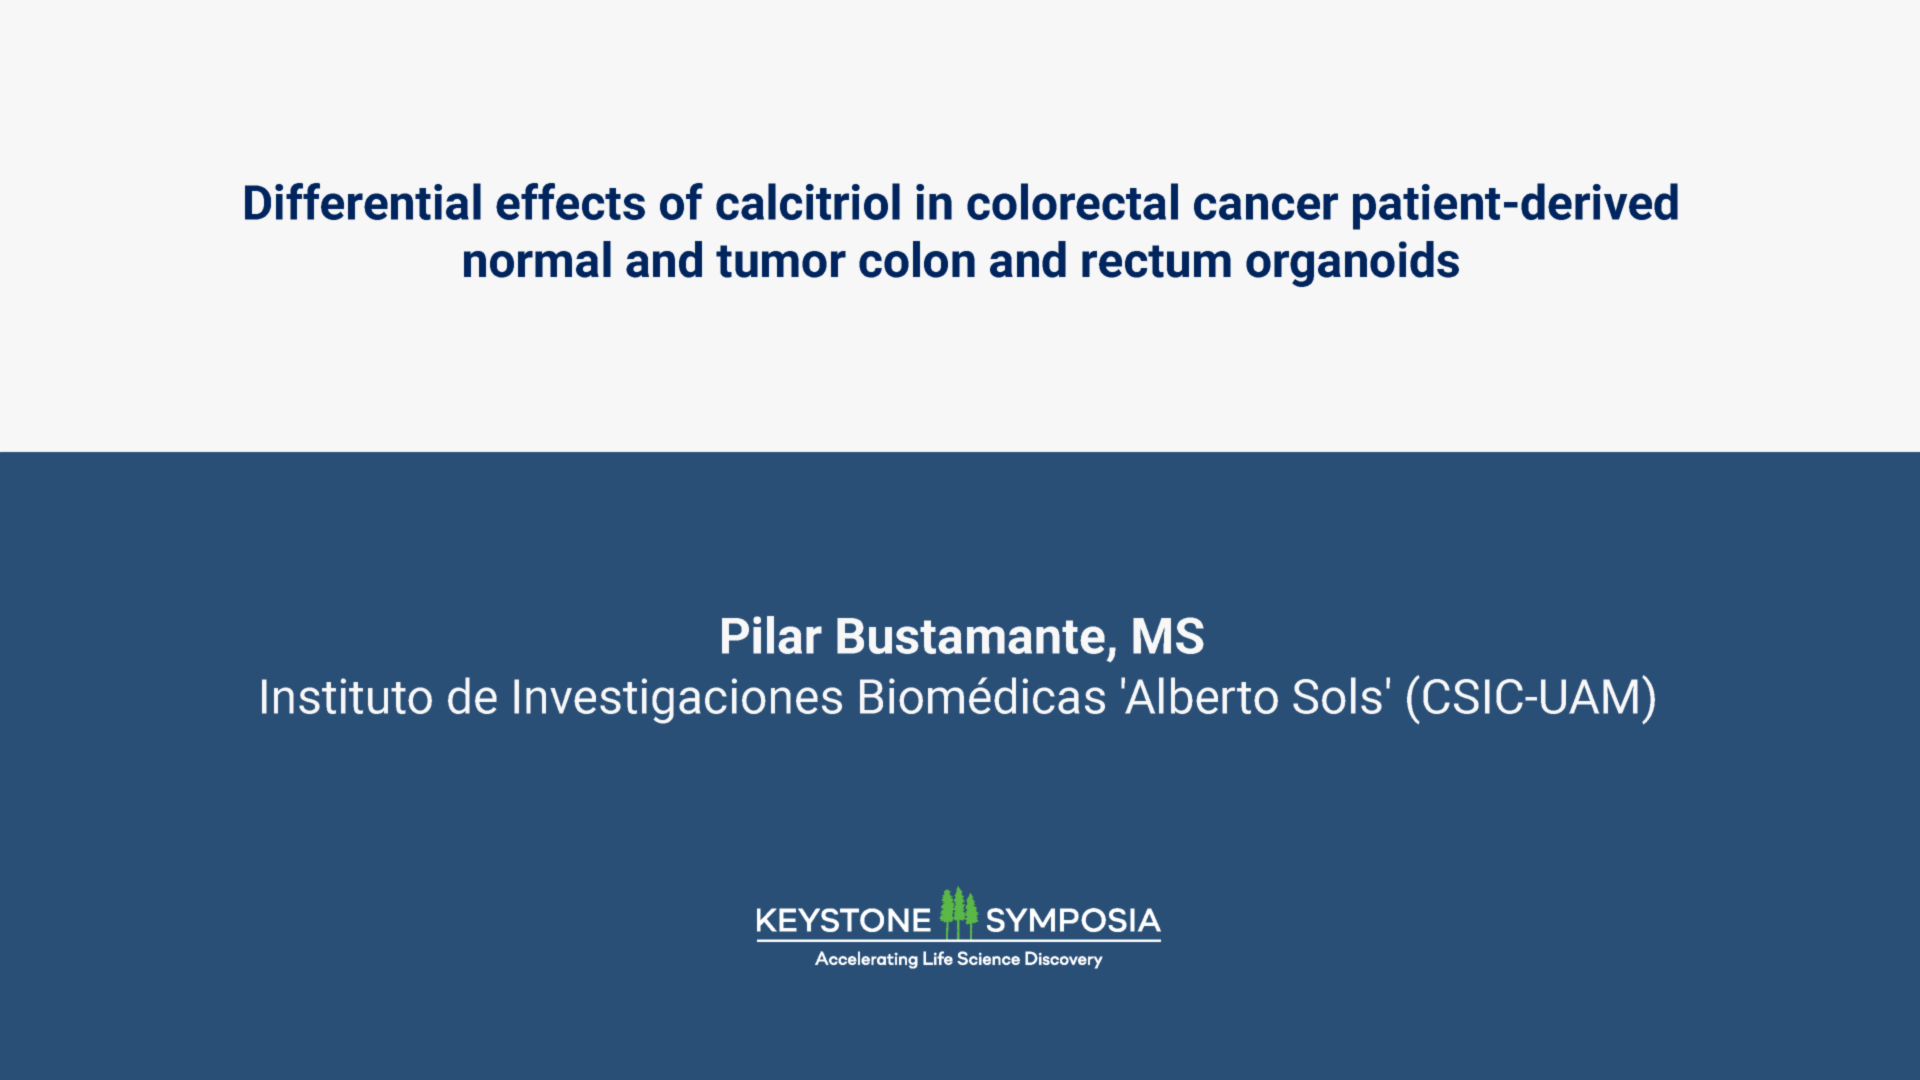 Differential effects of calcitriol in colorectal cancer patient-derived normal and tumor colon and rectum organoids icon